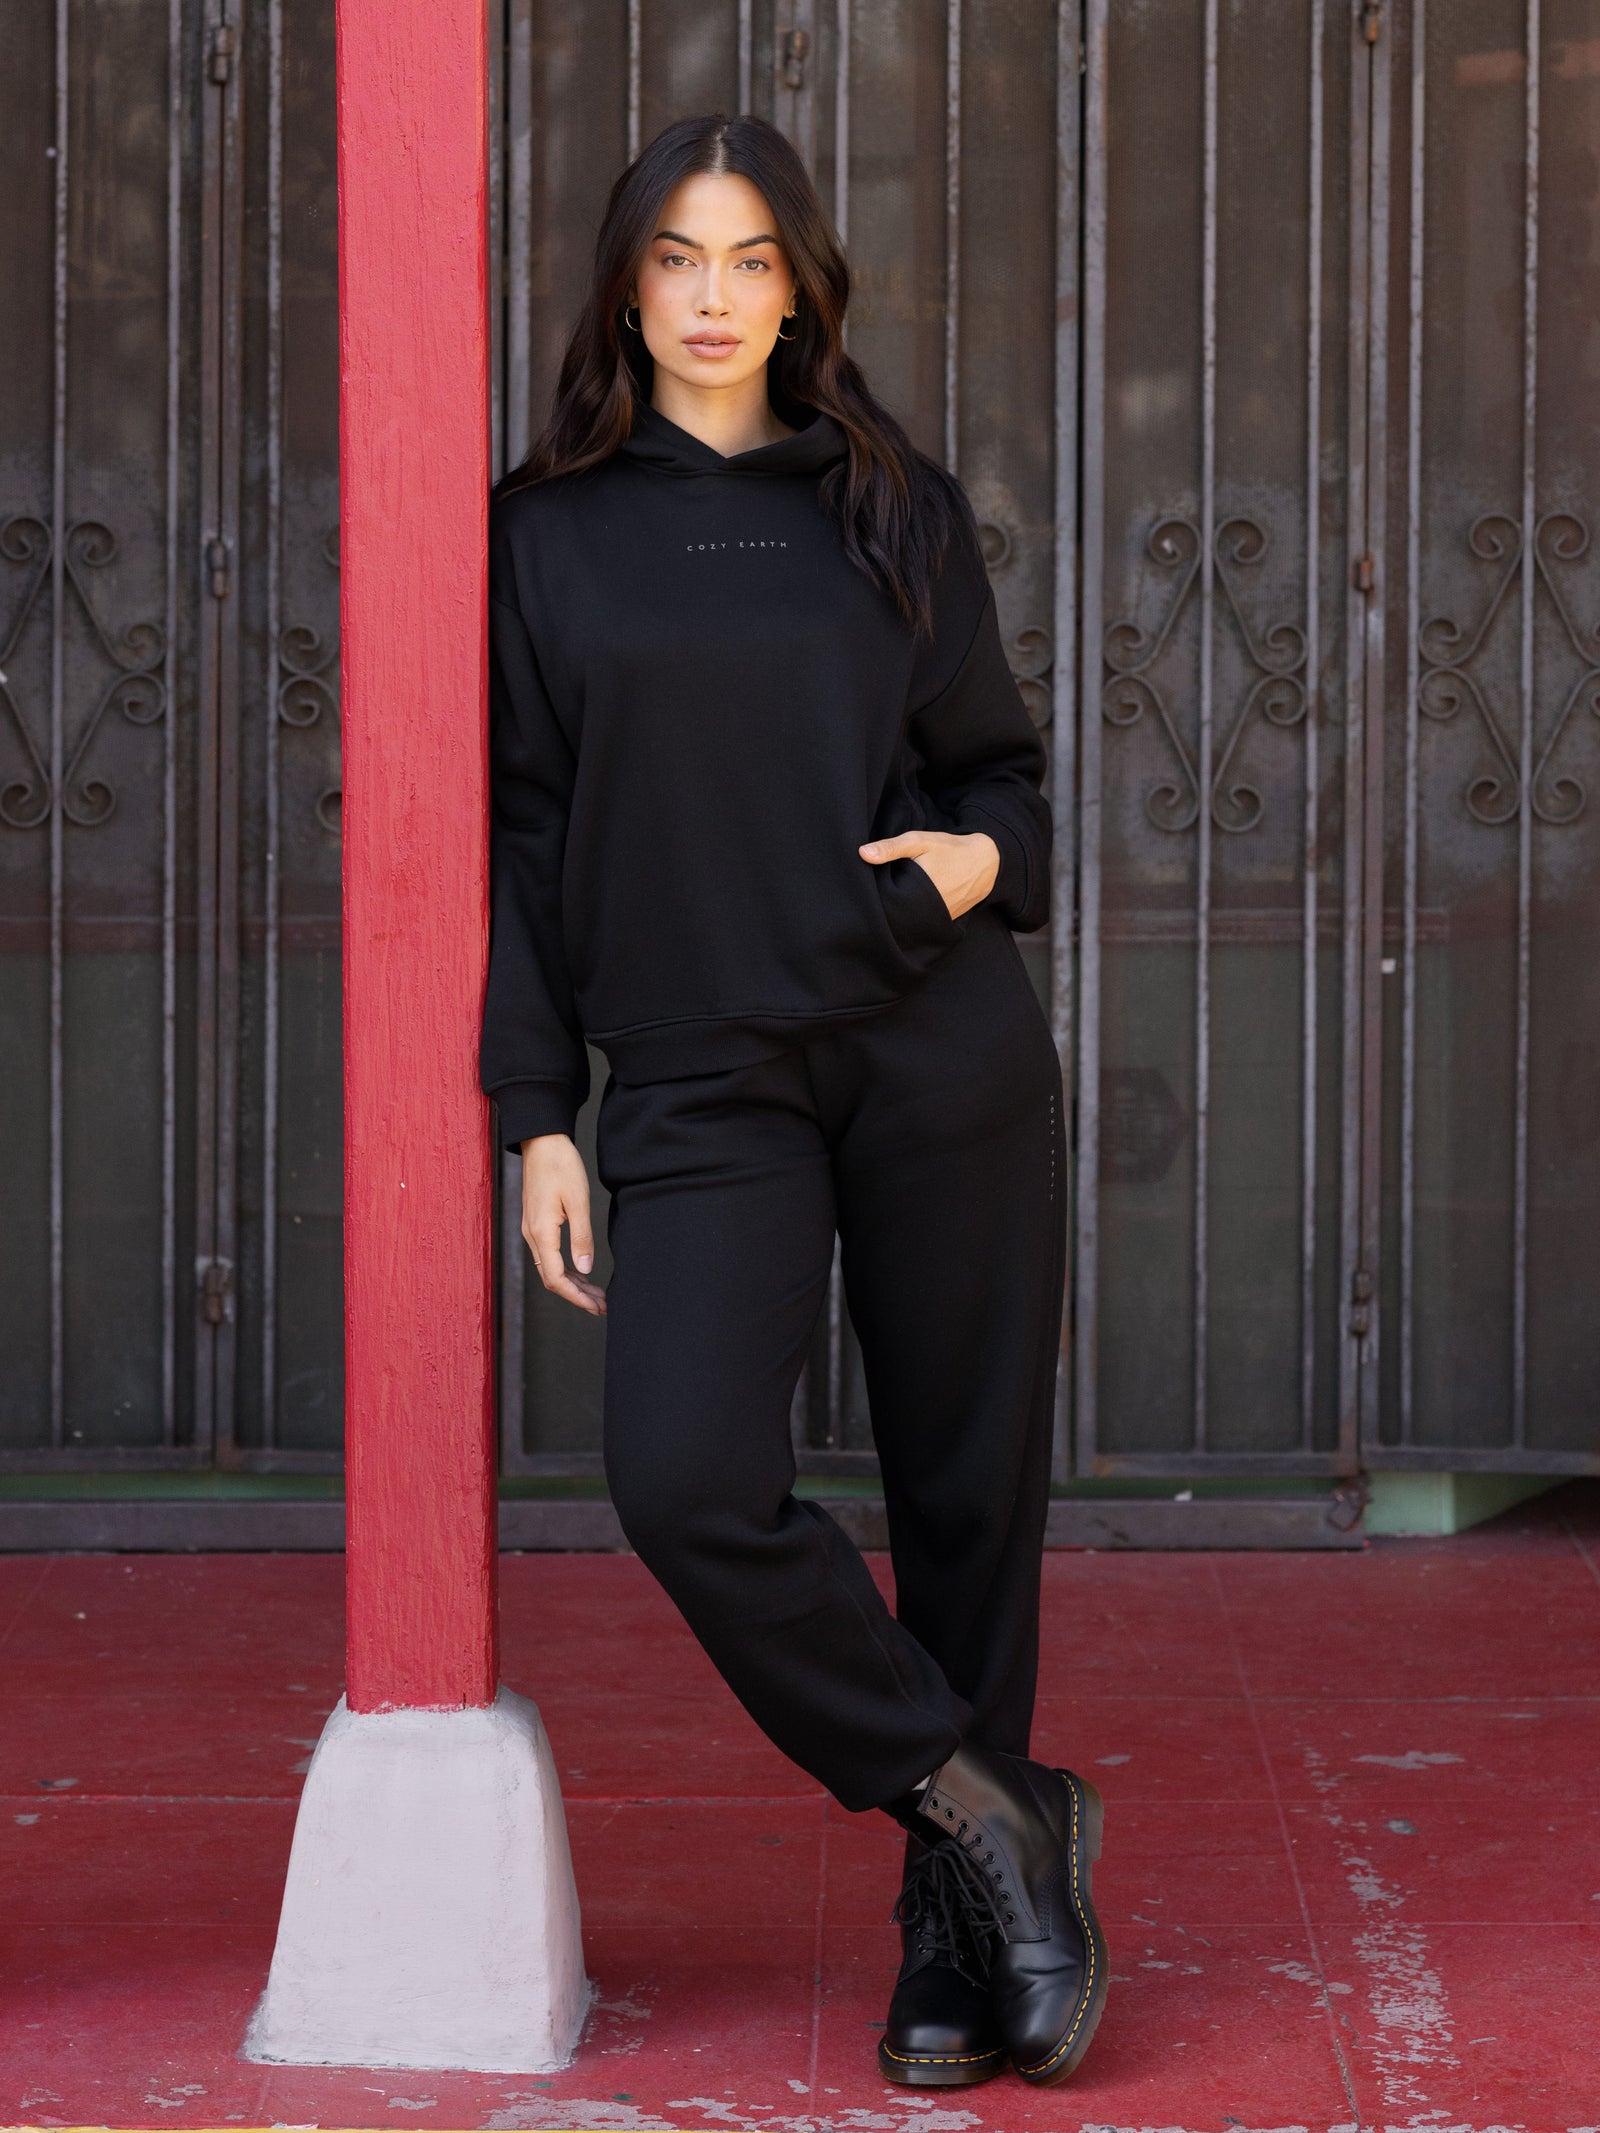 Black CityScape Joggers. The Joggers are being worn by a female model. The photo is taken with the models hands by the pocket of the joggers. The back ground is a downtown area. 